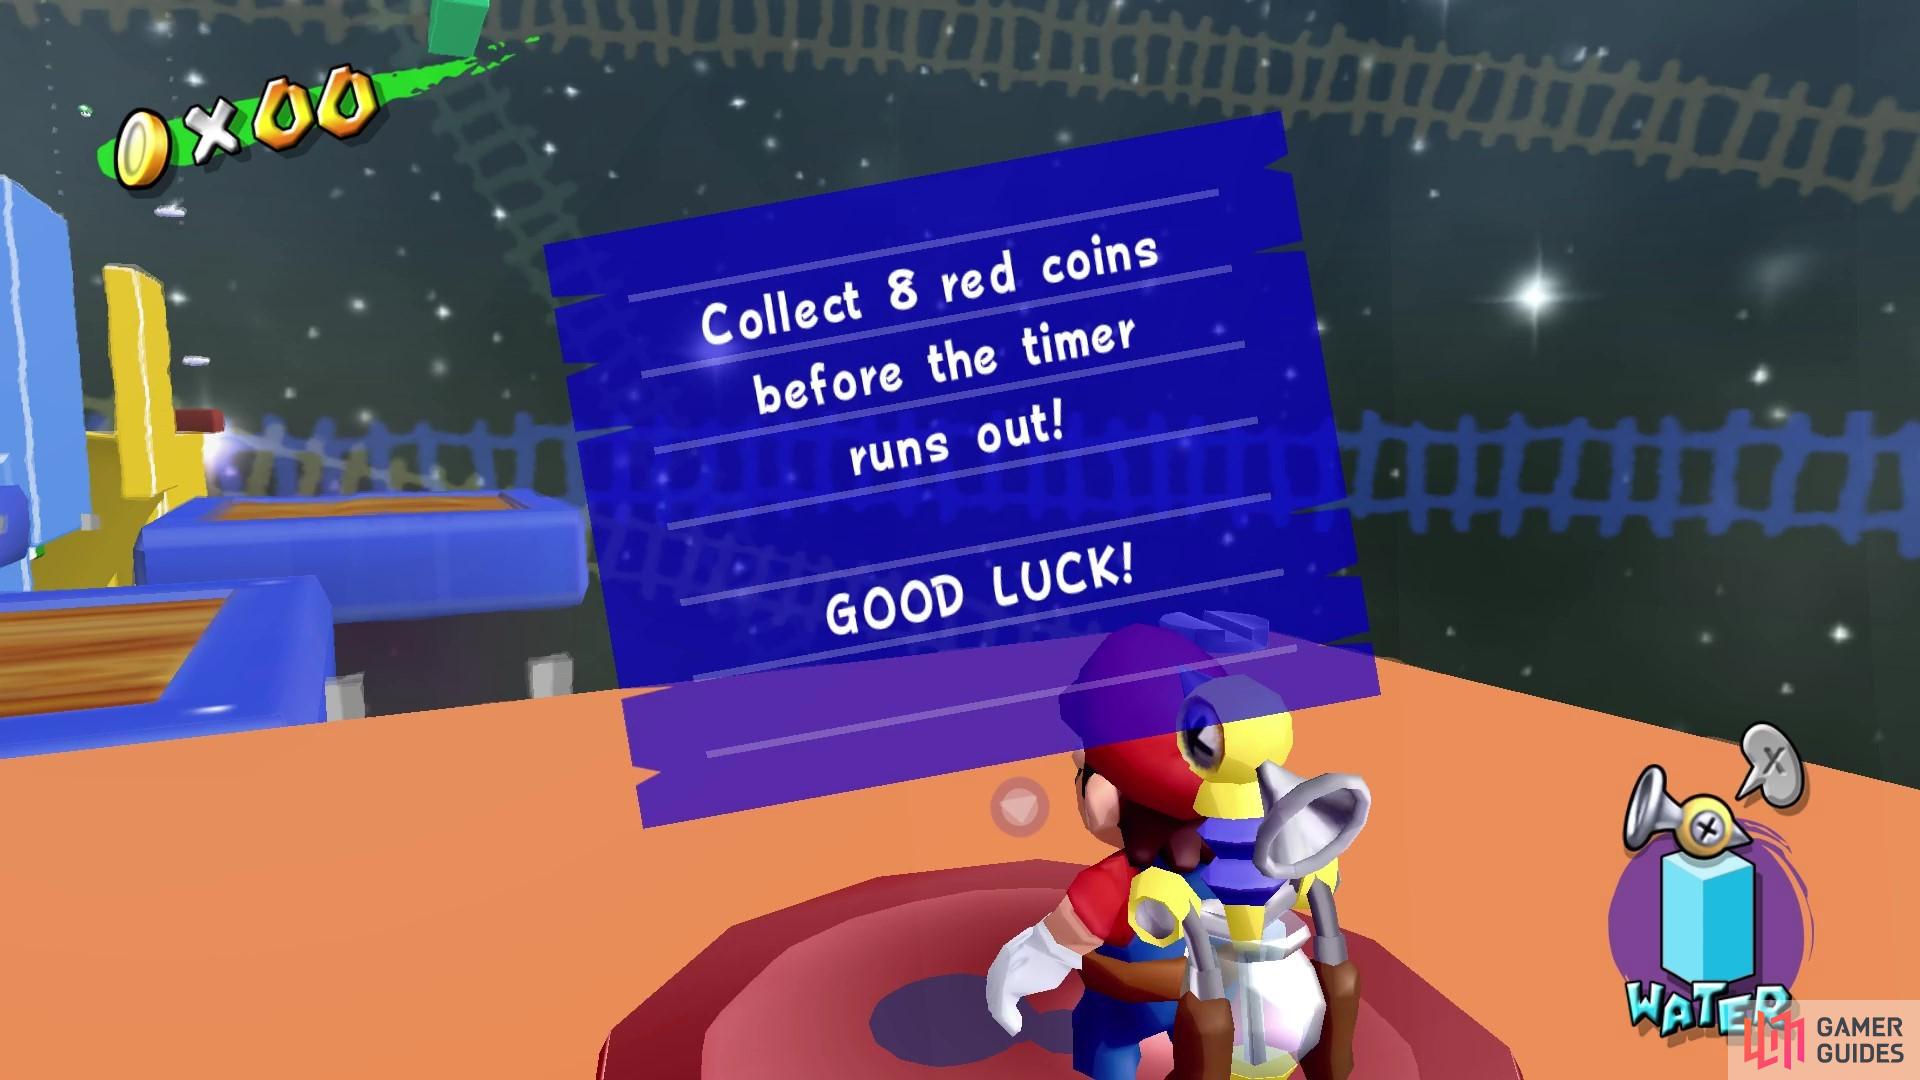 You'll have a minute and a half to collect all 8 red coins in this area.